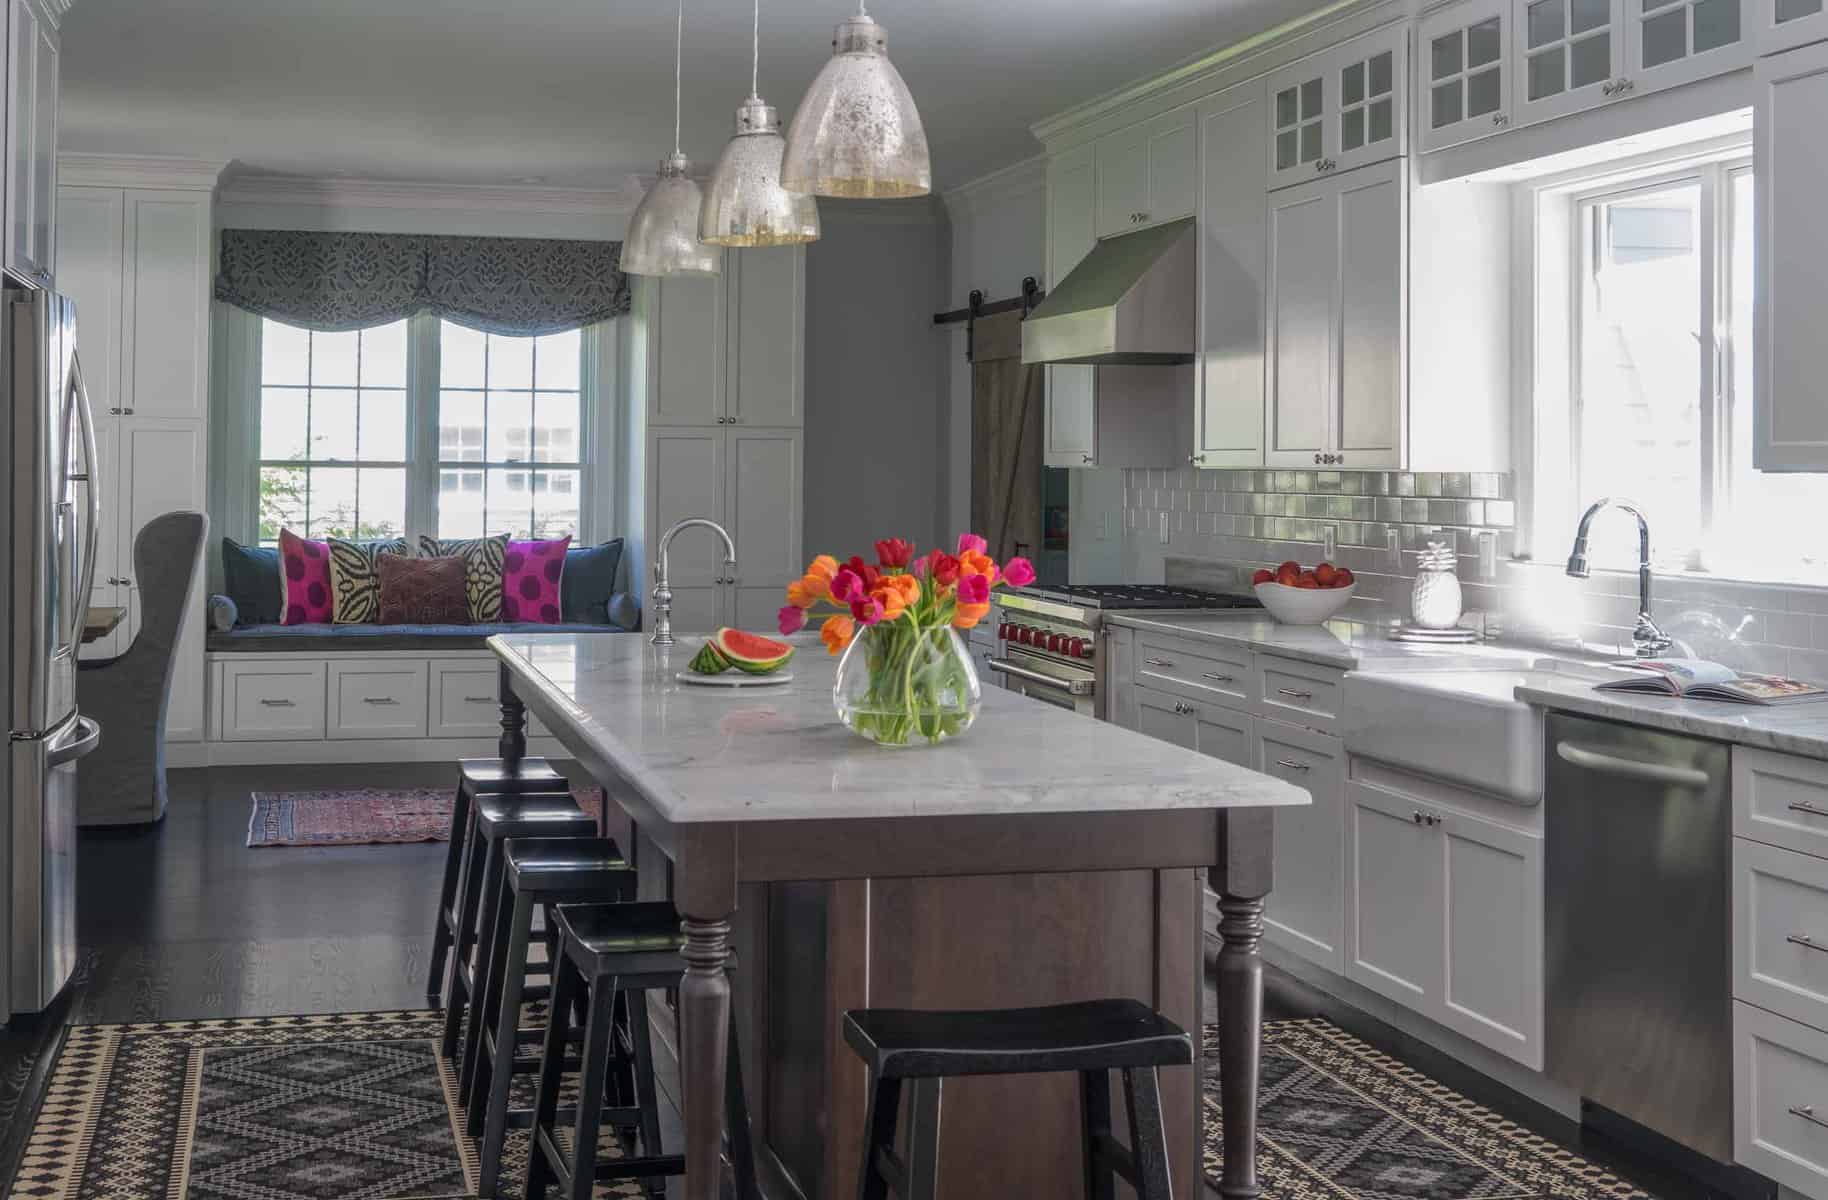 AFTER: The new kitchen island offers a stark color contrast to white cabinetry and establishes the farm table theme. Functionally, it provides ample seating. Cabinets were extended to ceilings with an upper row of interior lit transom cabinets. These maximize storage, given the high ceilings.